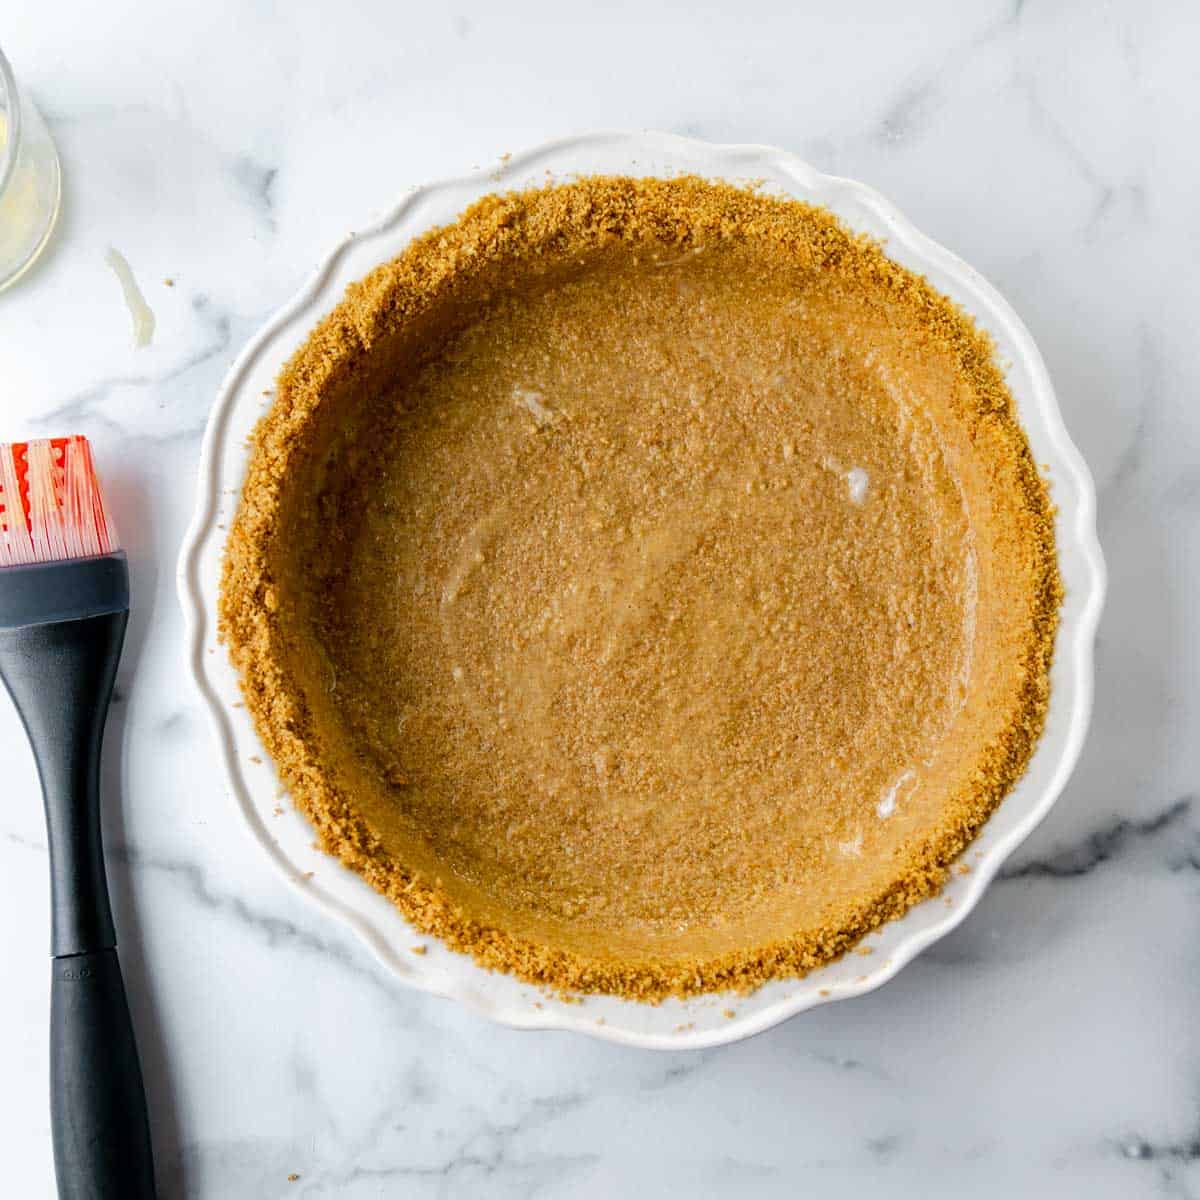 The graham cracker crust brushed with egg wash